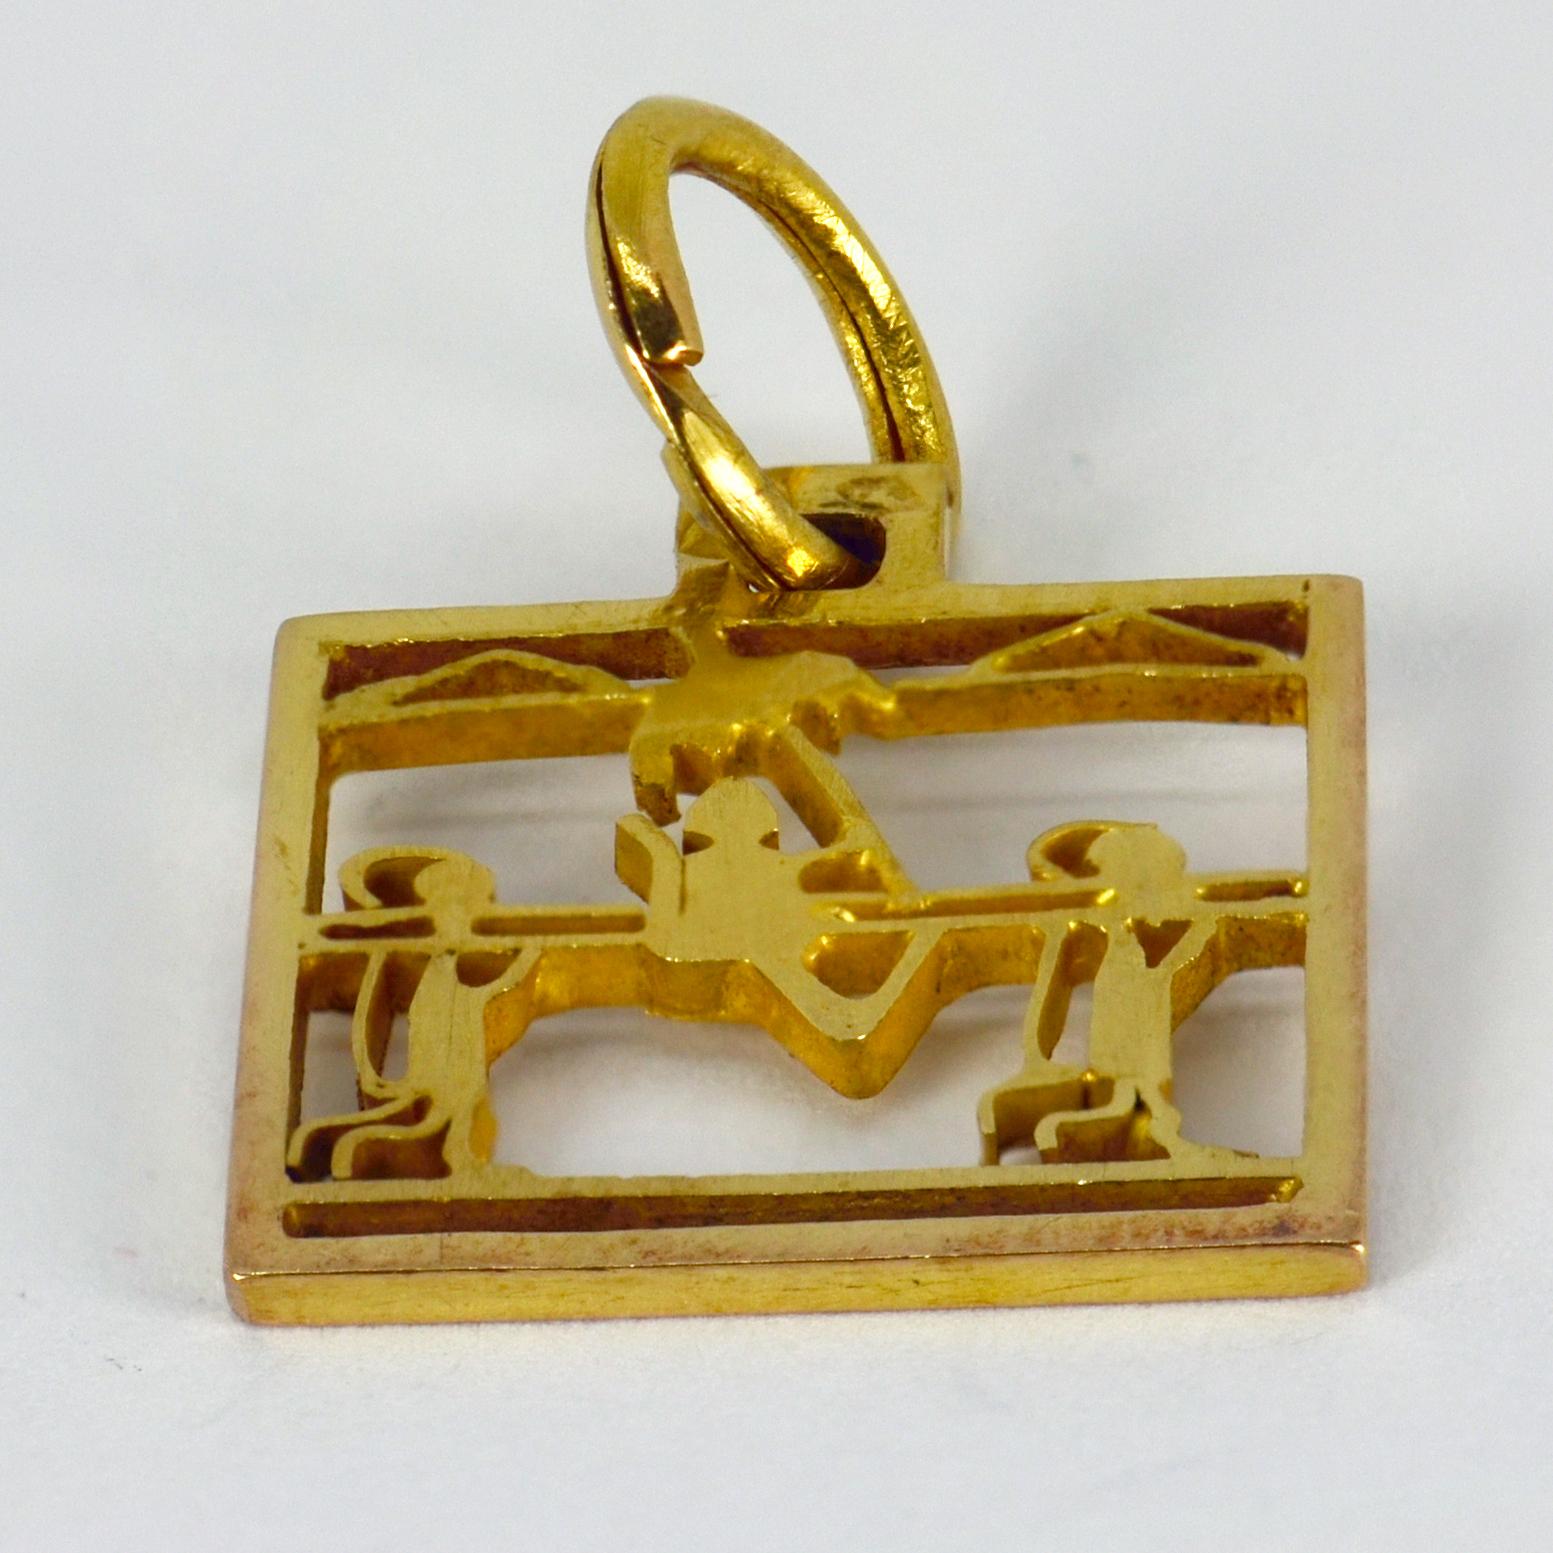 An 18 karat (18K)  yellow gold square charm pendant designed as a sedan chair and its bearers. Unmarked but tested as at least 18 karat gold.

Dimensions: 1.8 x 1.5 x 0.1 cm (not including jump ring)
Weight: 1.68 grams
